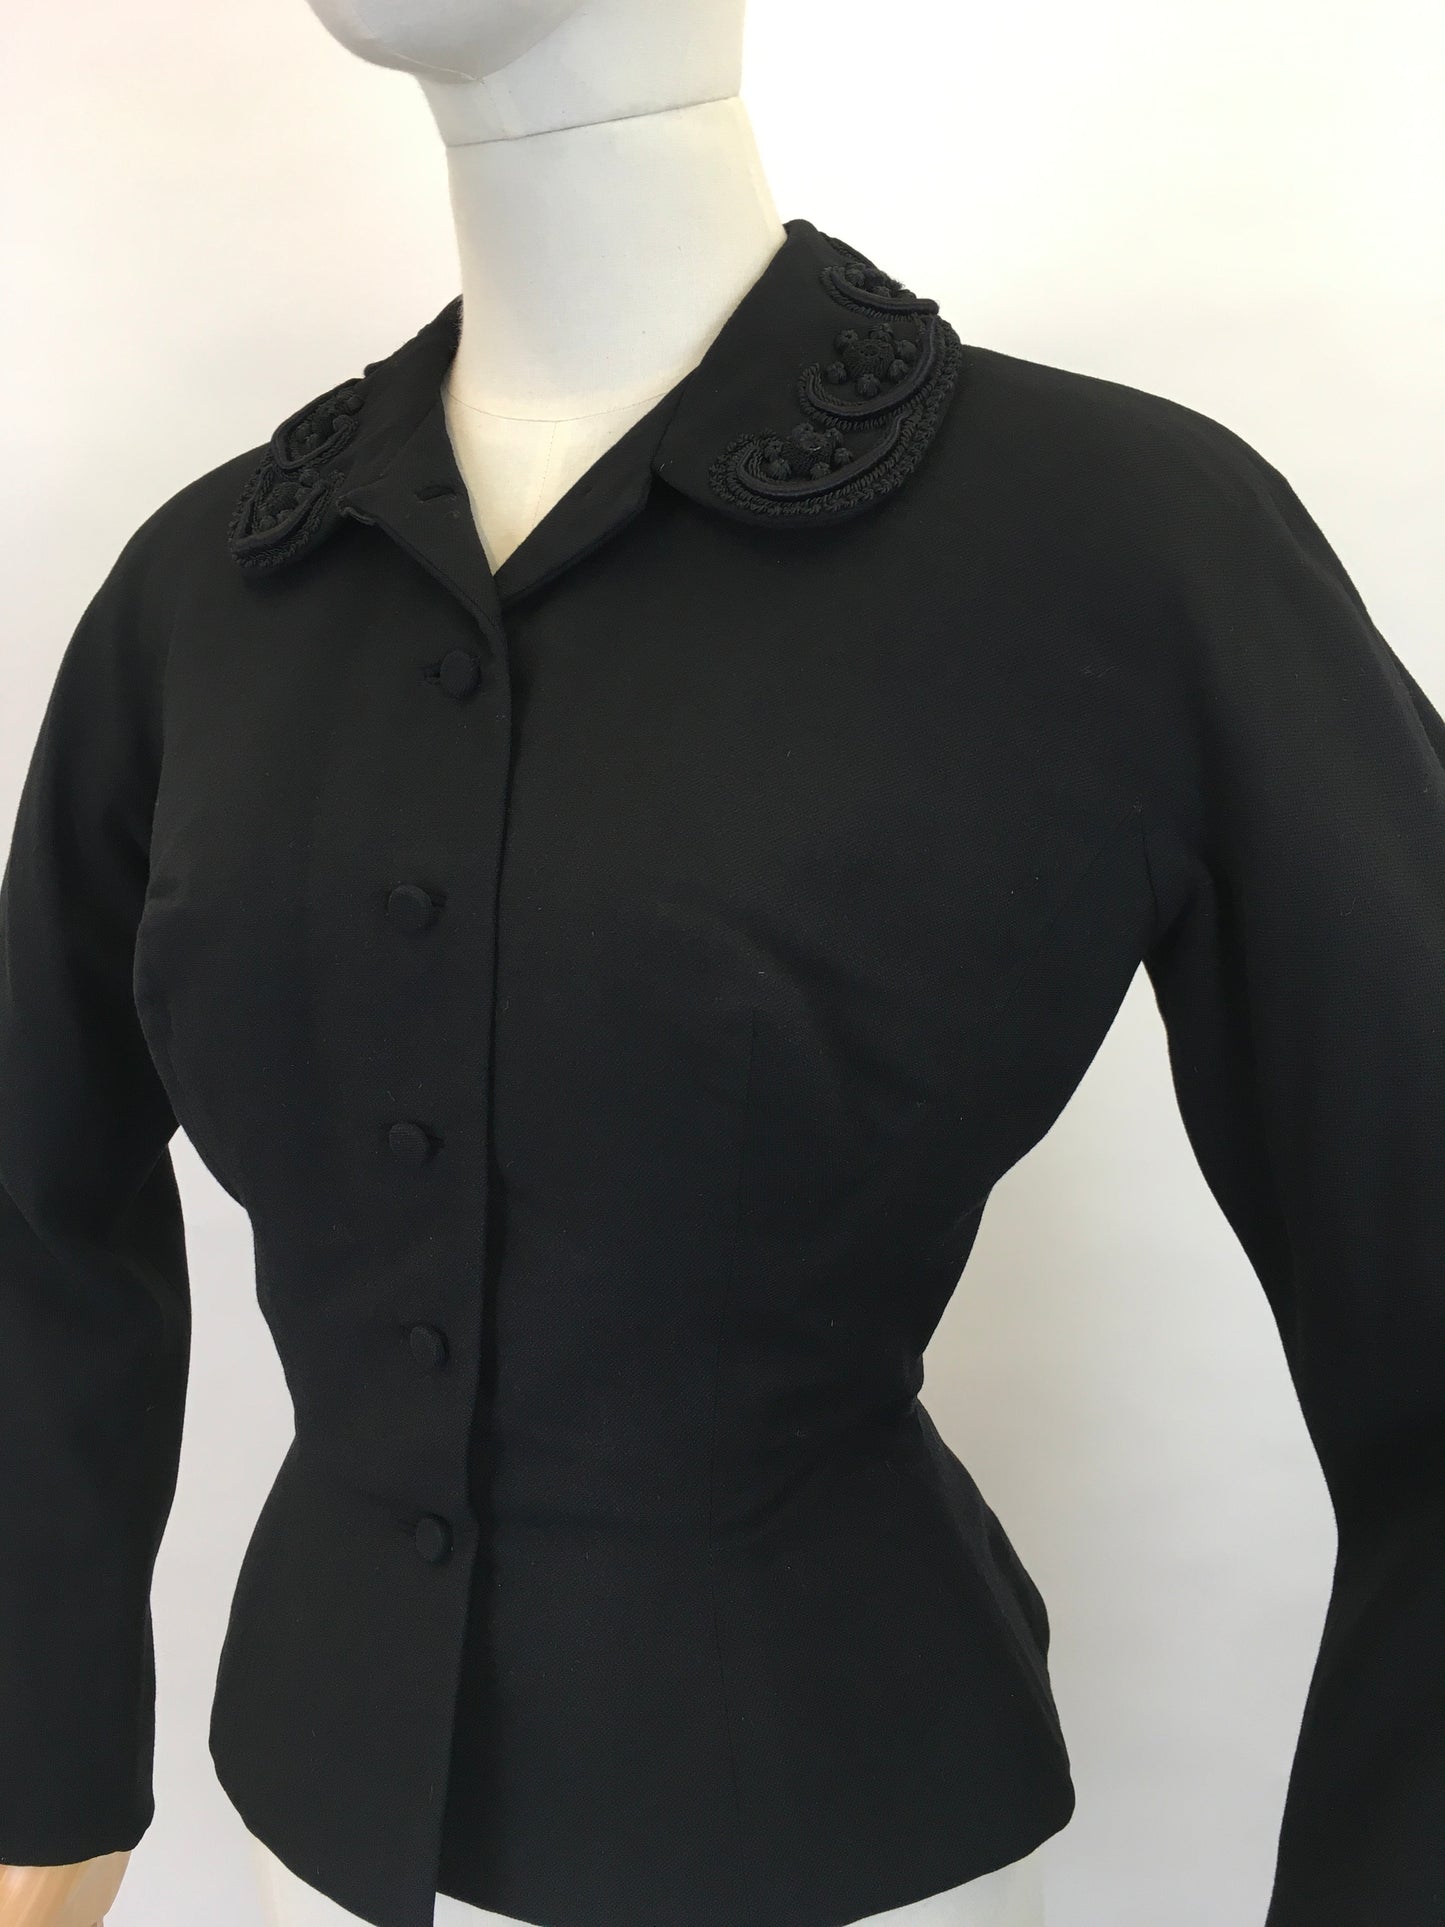 Original Late 1940’s early 1950’s ‘ Hattie Carnegie’ Black Jacket - Creating the Iconic New Look Silhouette